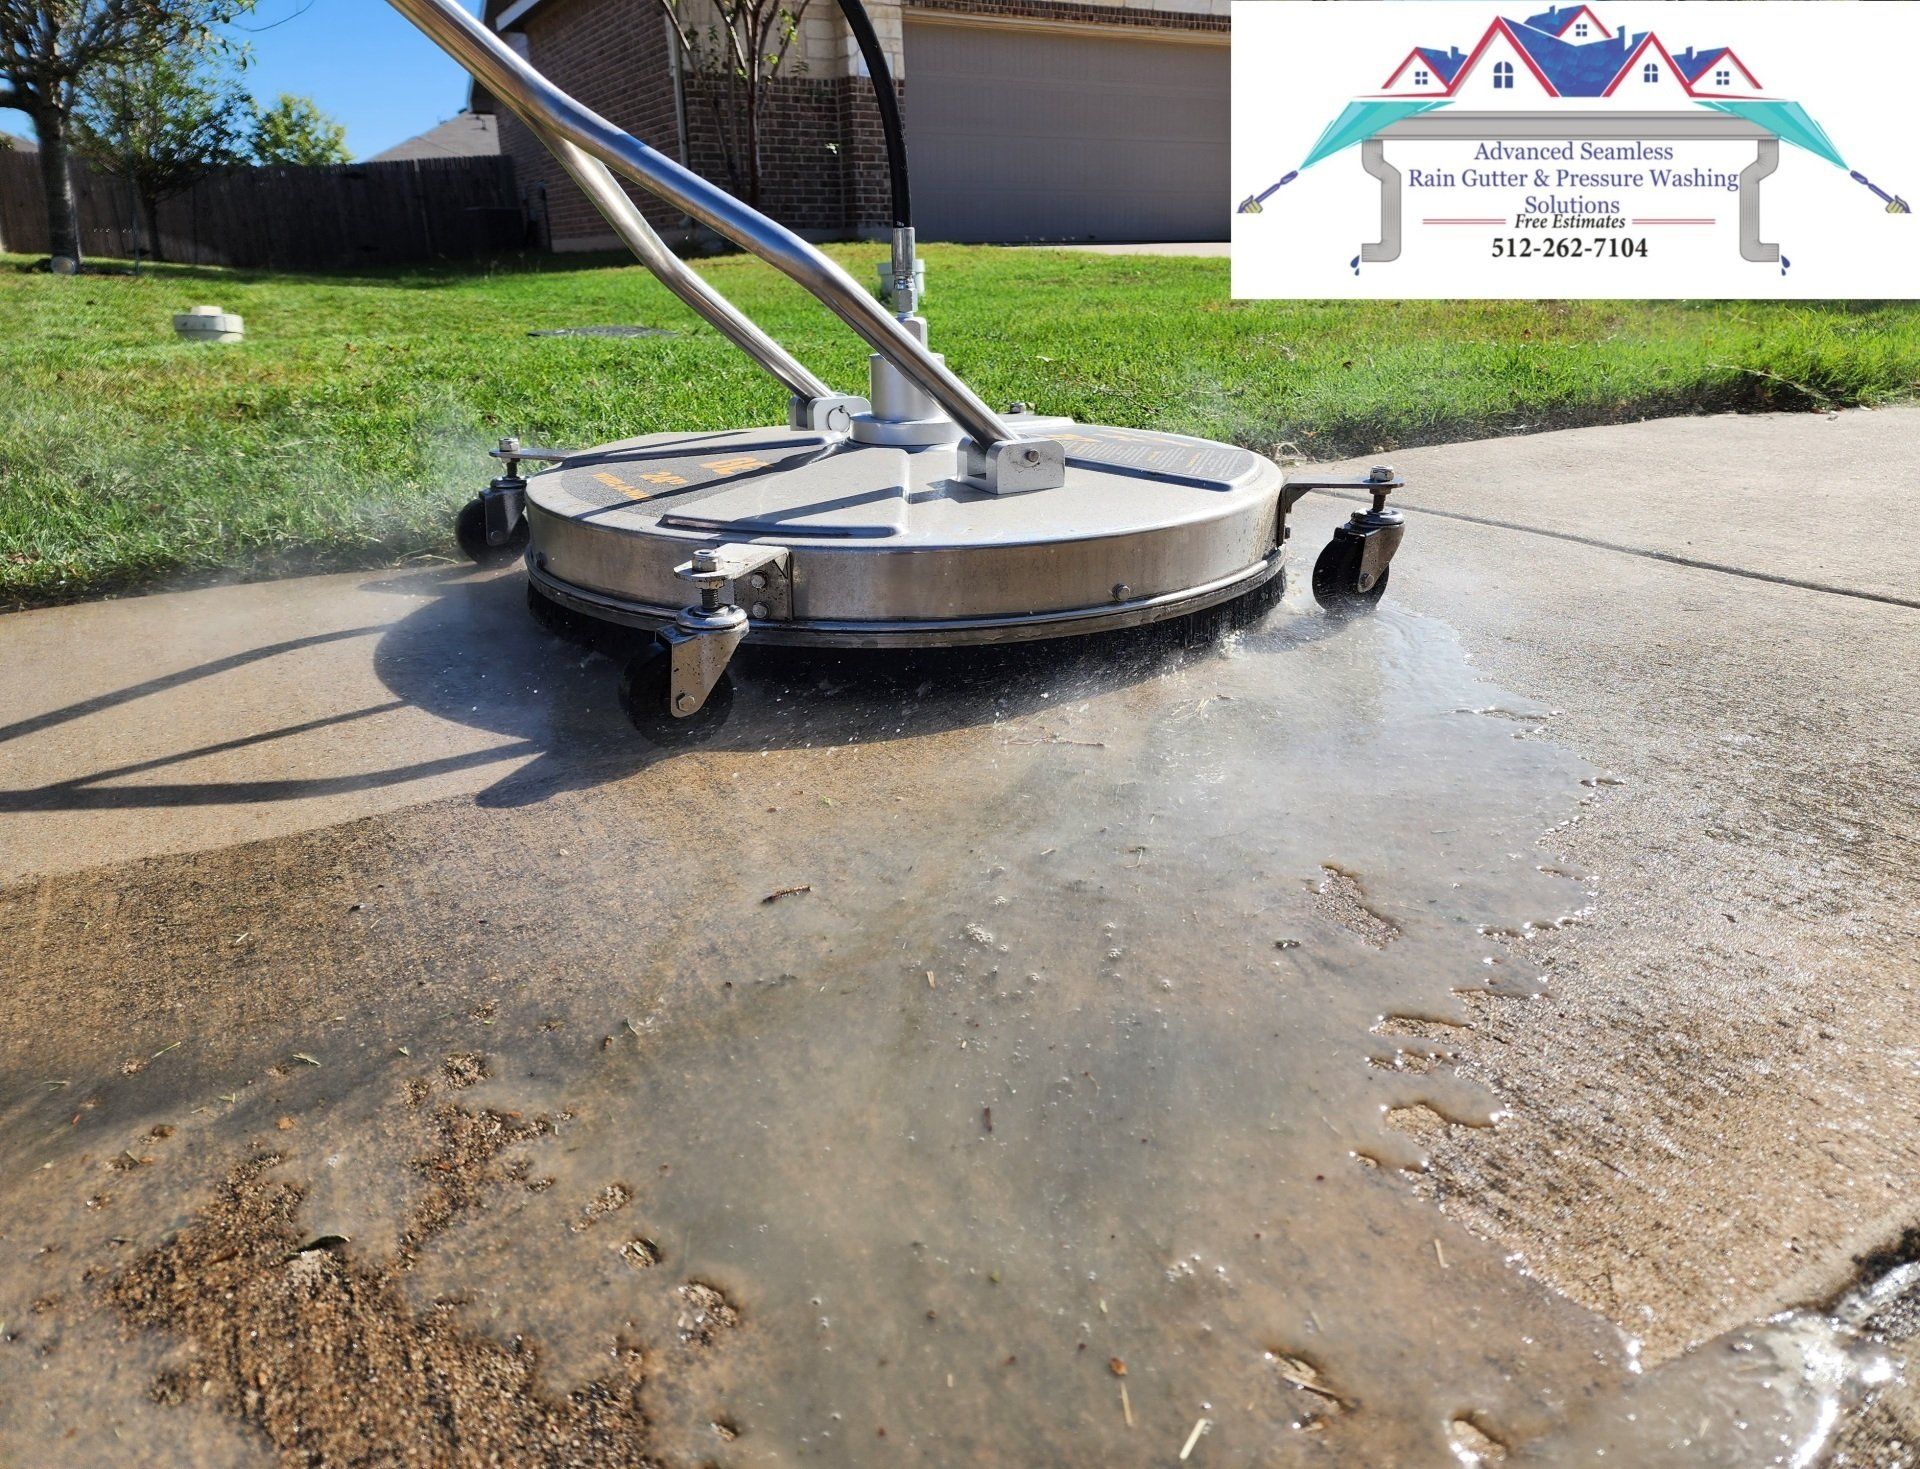 ASRGS is Now Offering Power Washing Services